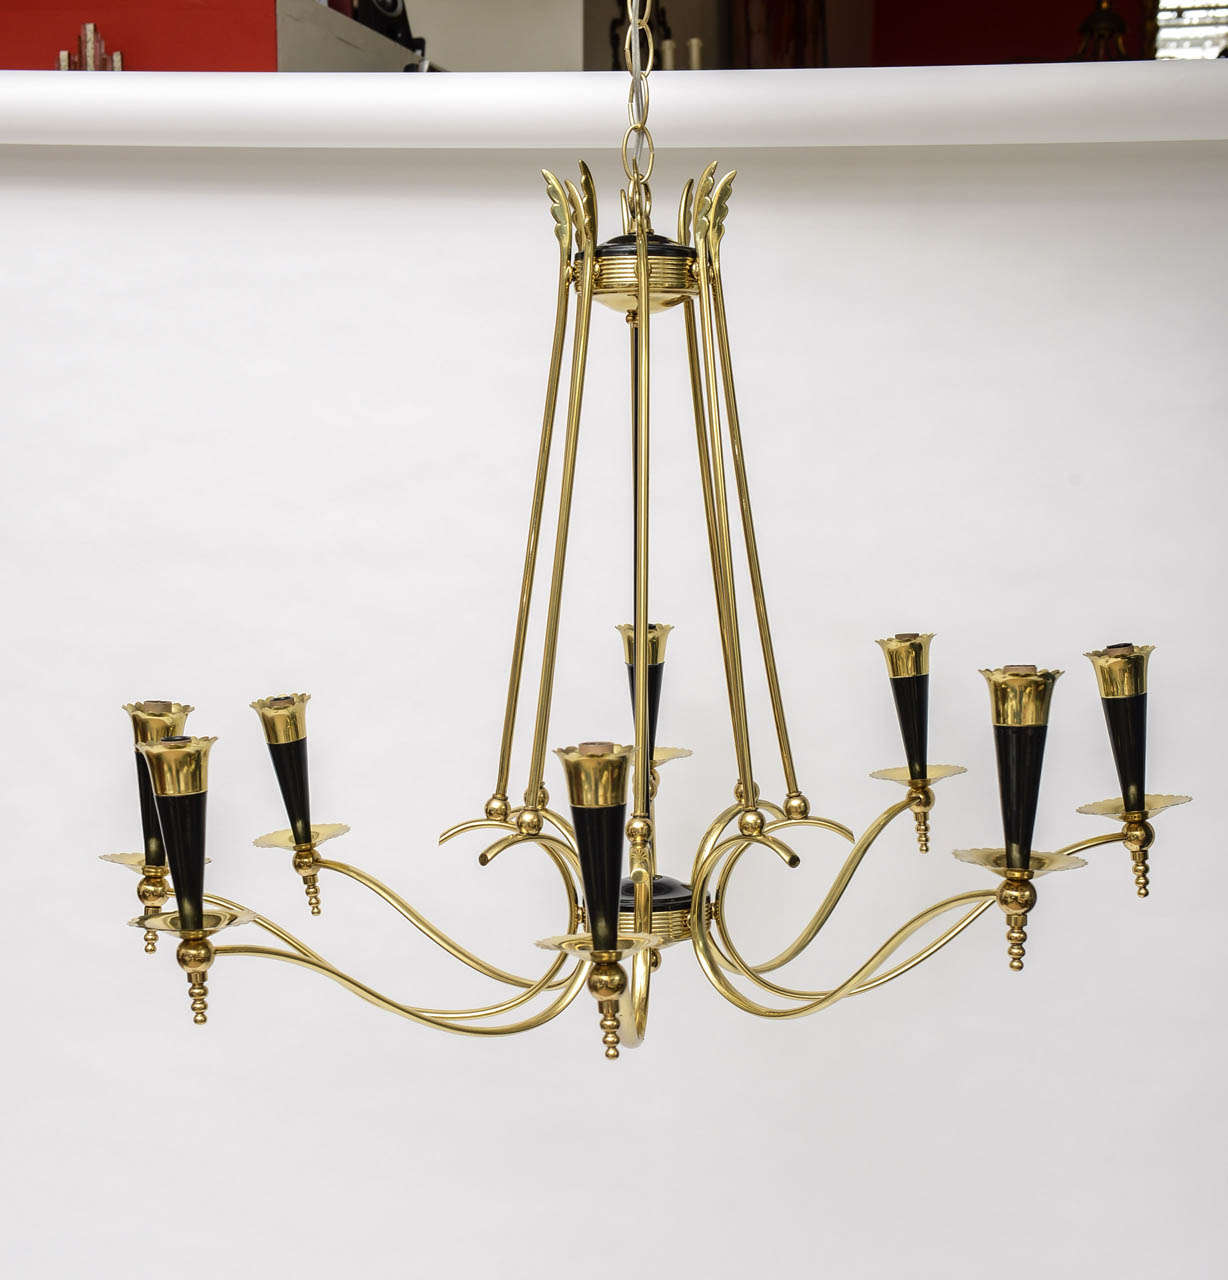 Mid-Century Modern Italian Brass Chandelier with Eight Arms.
Eight socket holders in brass and aluminum cones painted in black lacquer.
The chandelier is in perfect working condition and it takes 8 light bulbs with max. 25 watts.
Can hold little